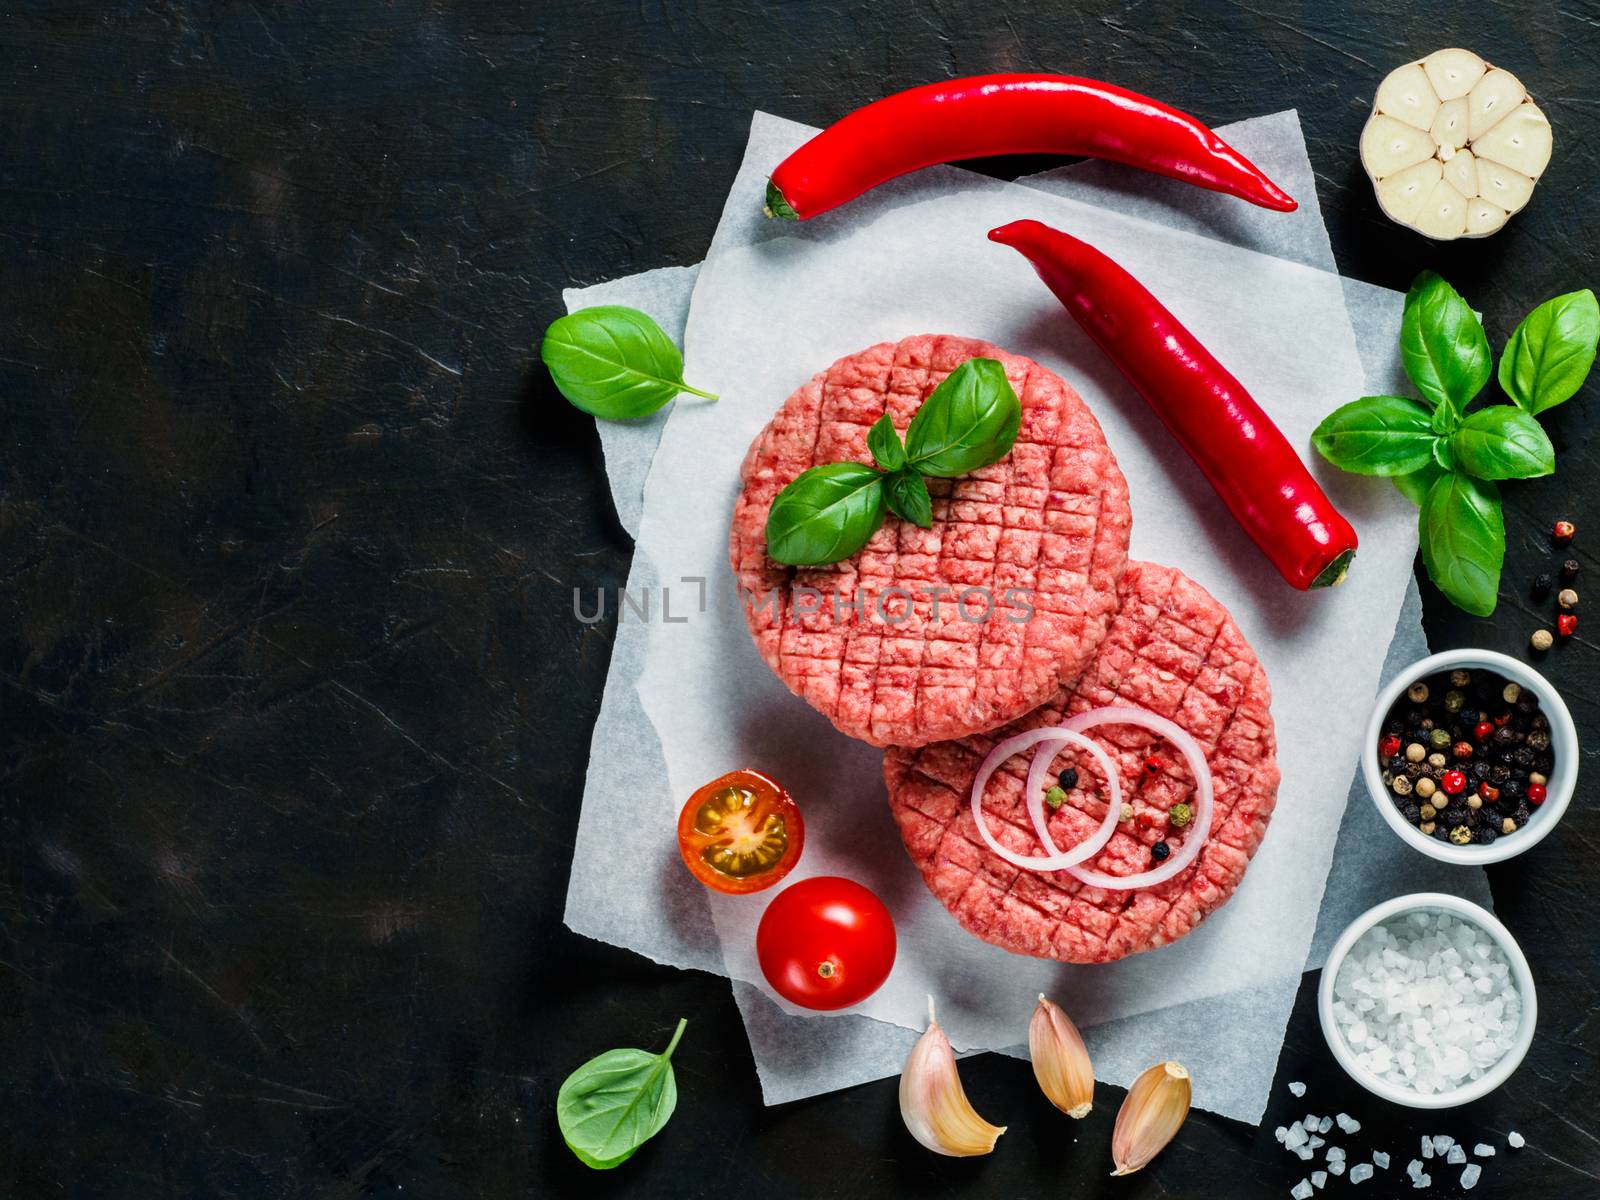 Two raw beef meat steak cutlets for burger with spices and vegetables on black concrete background. Making homemade burger concept. Top view or flat lay. Copy space.